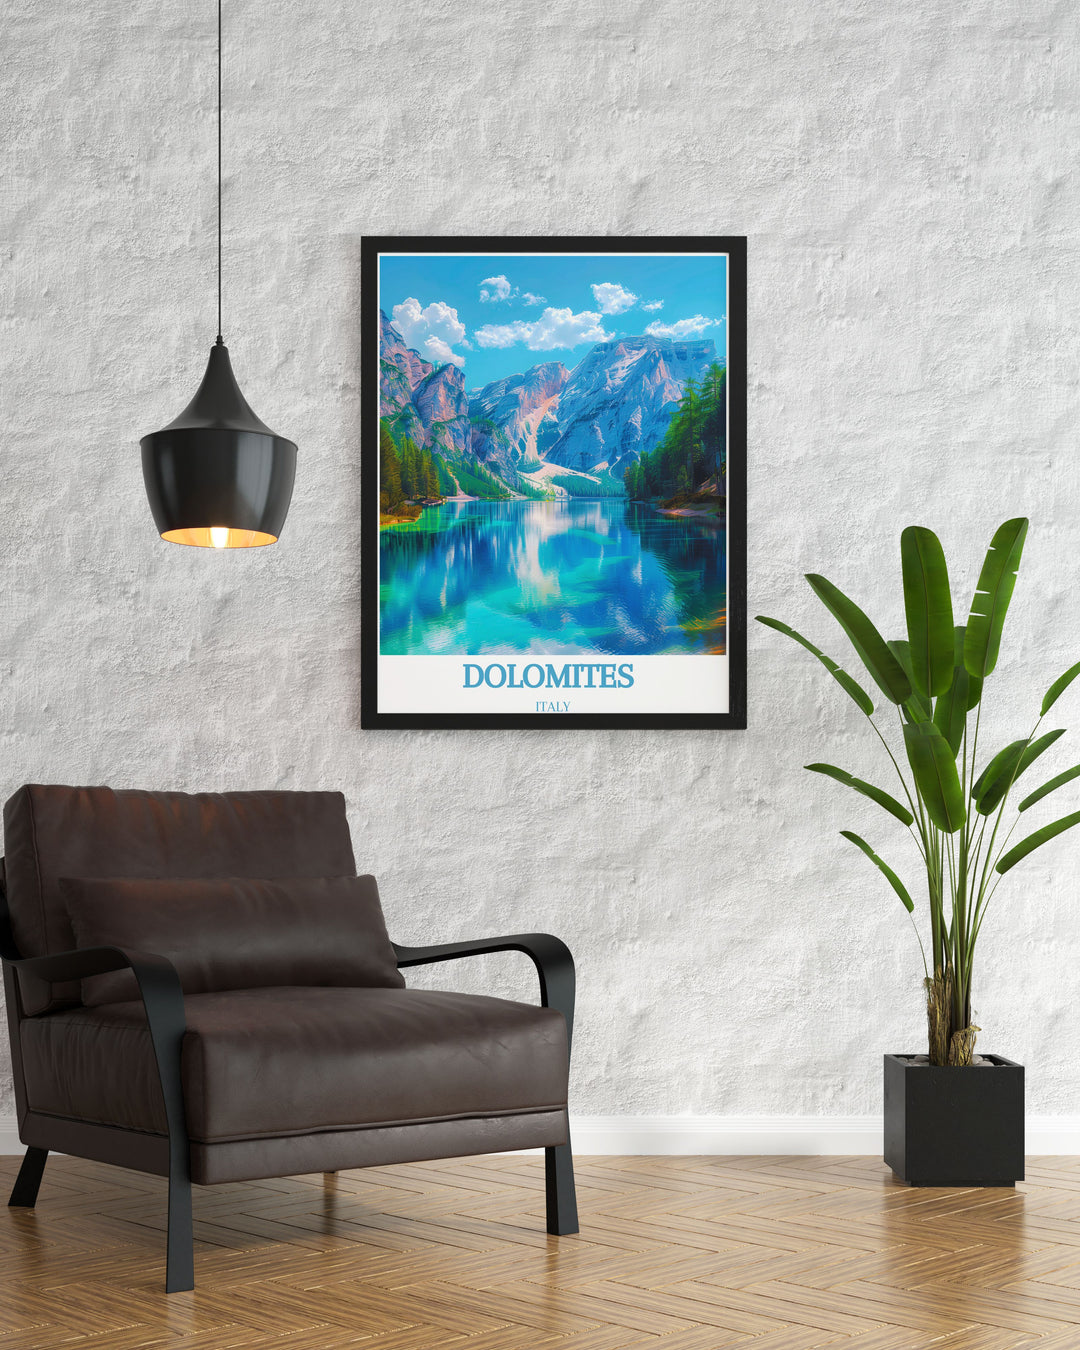 Framed art showcasing the majestic views of the Dolomites, capturing the natural splendor and alpine beauty of Italys iconic mountain range.